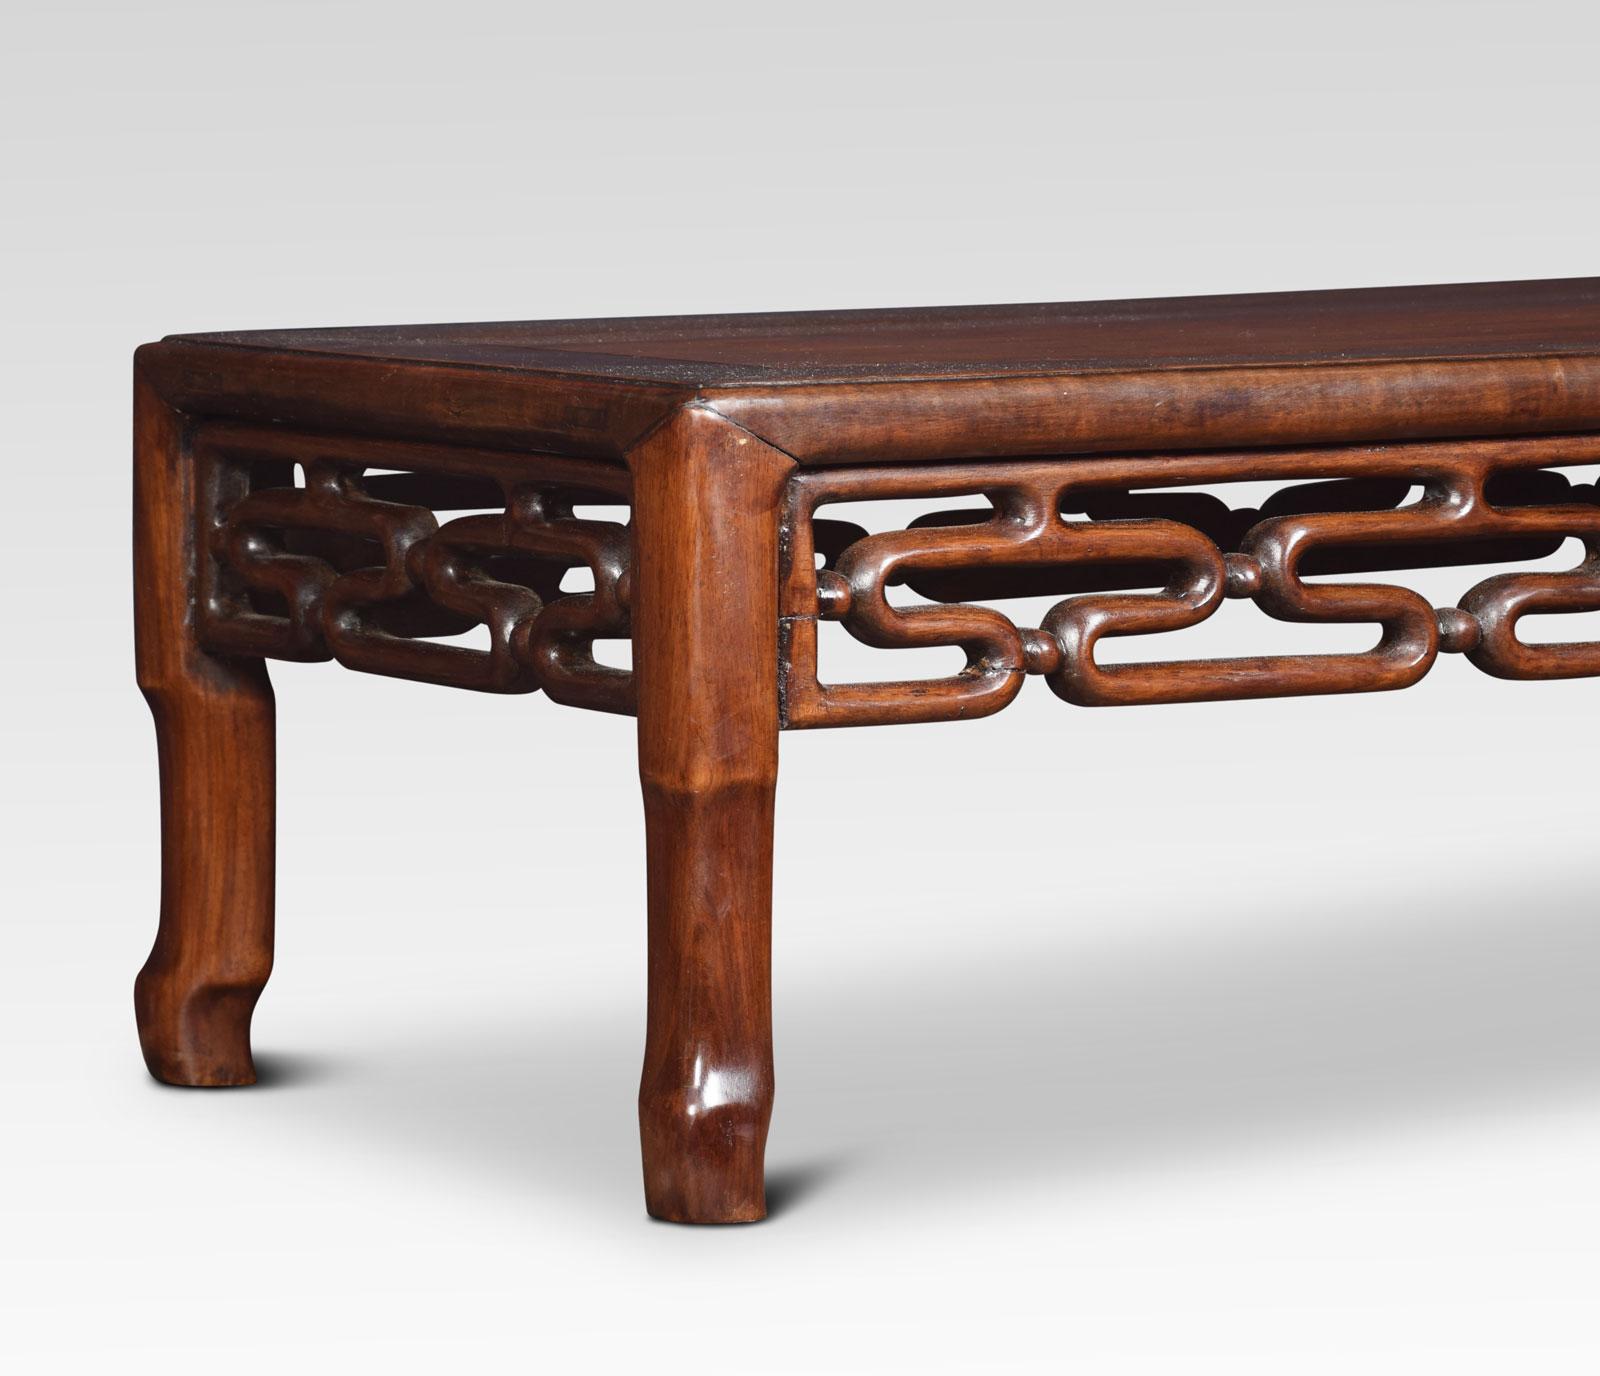 Chinese padouk opium/coffee table the rectangular top above the pierced frieze. All raised up on round moulded legs.
Dimensions
Height 10.5 inches
Length 30 inches
width 16 inches.